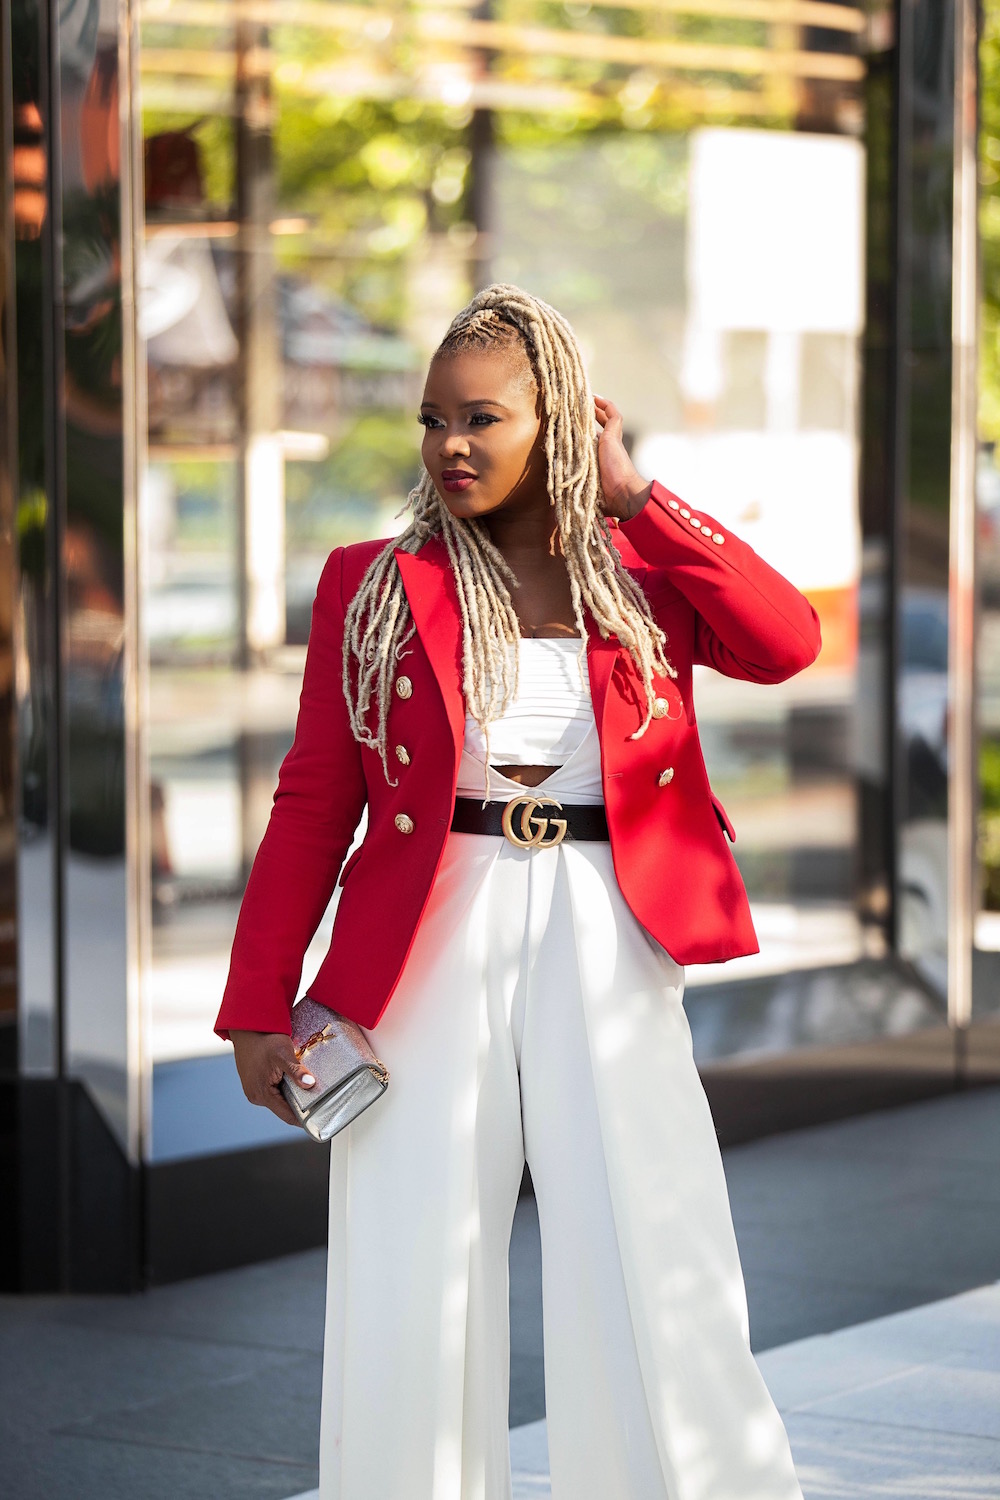 7-claire-sulmers-fashion-bomb-daily-how-to-wear-a-red-balmain-blazer-a-quick-note-about-respect-fashion-bomb-daily